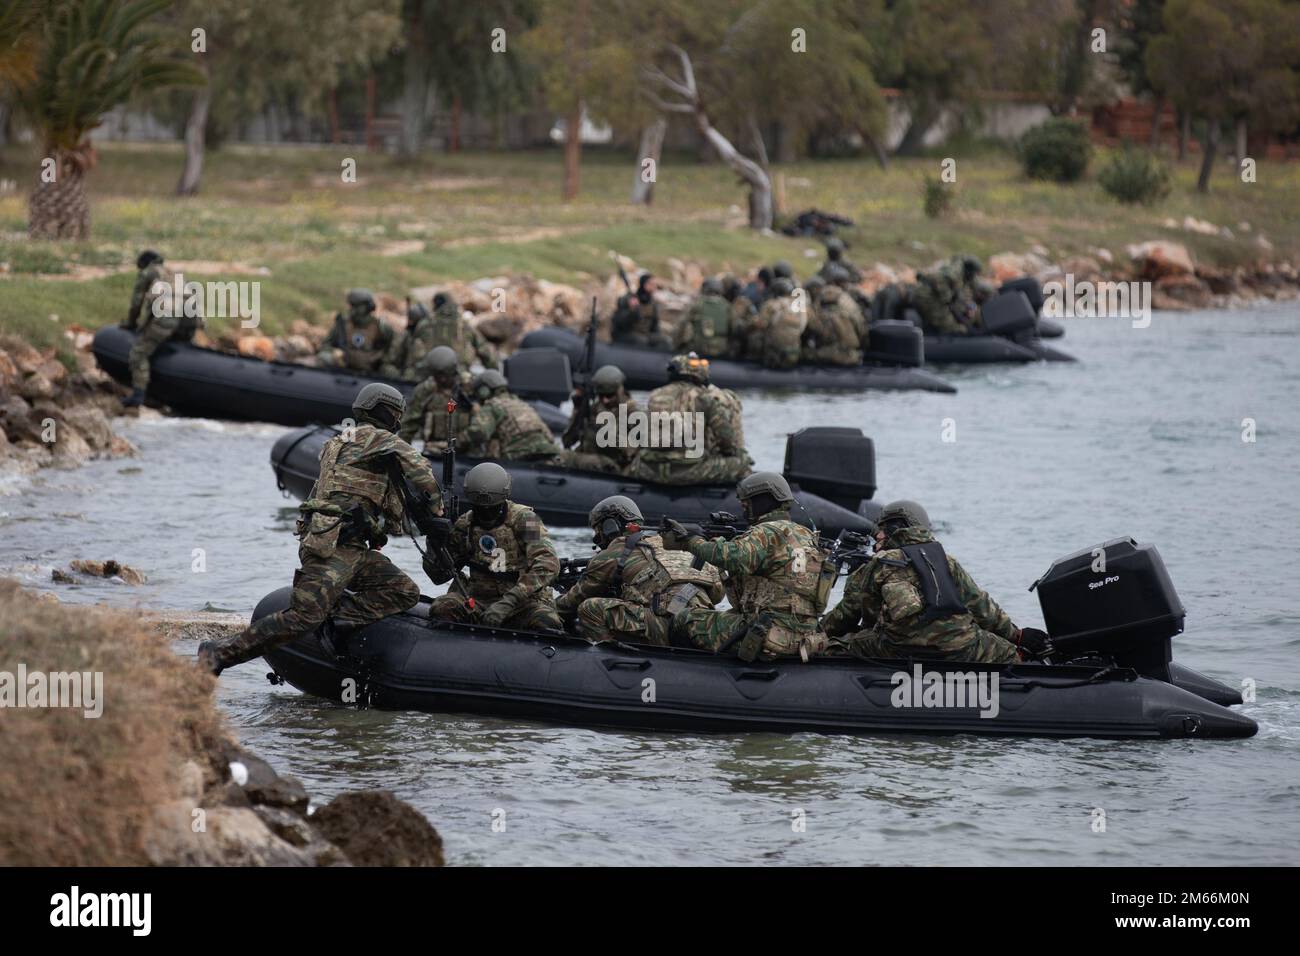 Special Operations Forces (SOF) members load into rafts as part of a demonstration during the Distinguished Visitors’ Day ceremony of Exercise Orion 22 where SOF from Bulgaria, Cyprus, France, Greece, Israel and the U.S. participated at Kentro Ekpaideusis Eidikon Dynameon (KEED) Special Forces Training Center near Nea Peramos, Greece, April 7, 2022. Exercise Orion reinforces Greece as a regional SOF leader, enhances interoperability across multiple domains, and strengthens relationships with NATO and non-NATO partners. The exercise focuses on highlighting operational capabilities, internationa Stock Photo